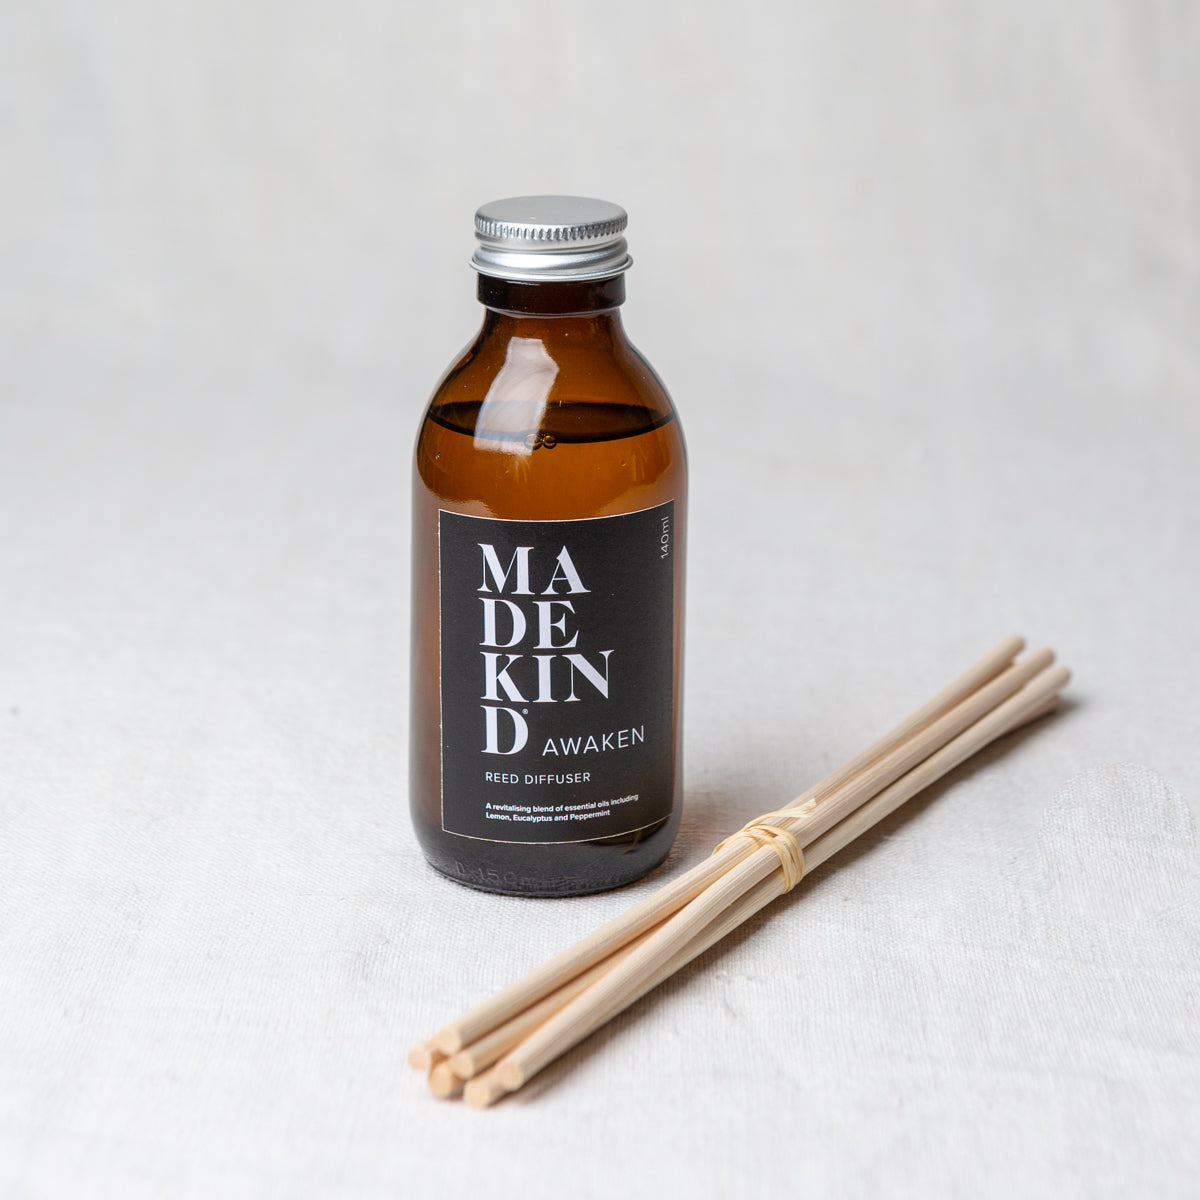 MadeKind Awaken aromatherapy reed diffuser in glass amber bottle. Pure essential oil blend includes Lemon, Eucalyptus and peppermint. Reeds come included and presented in a Kraft gift box.